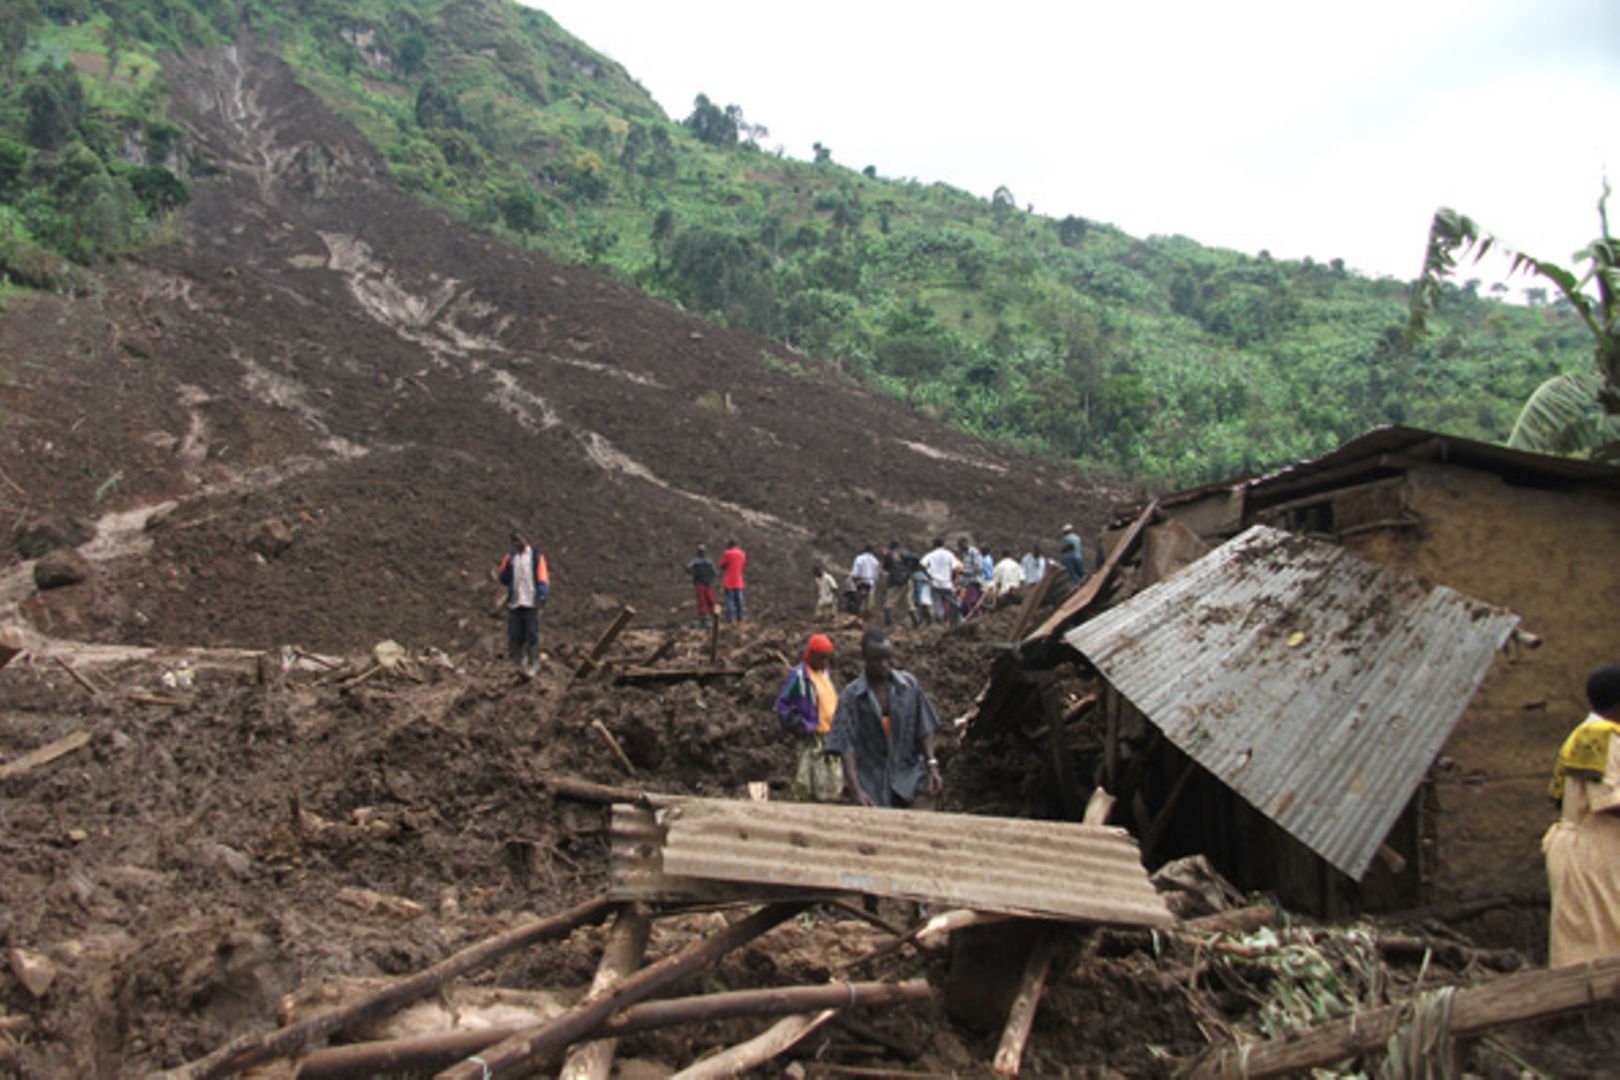 Uganda's resilience in the face of climate change effects